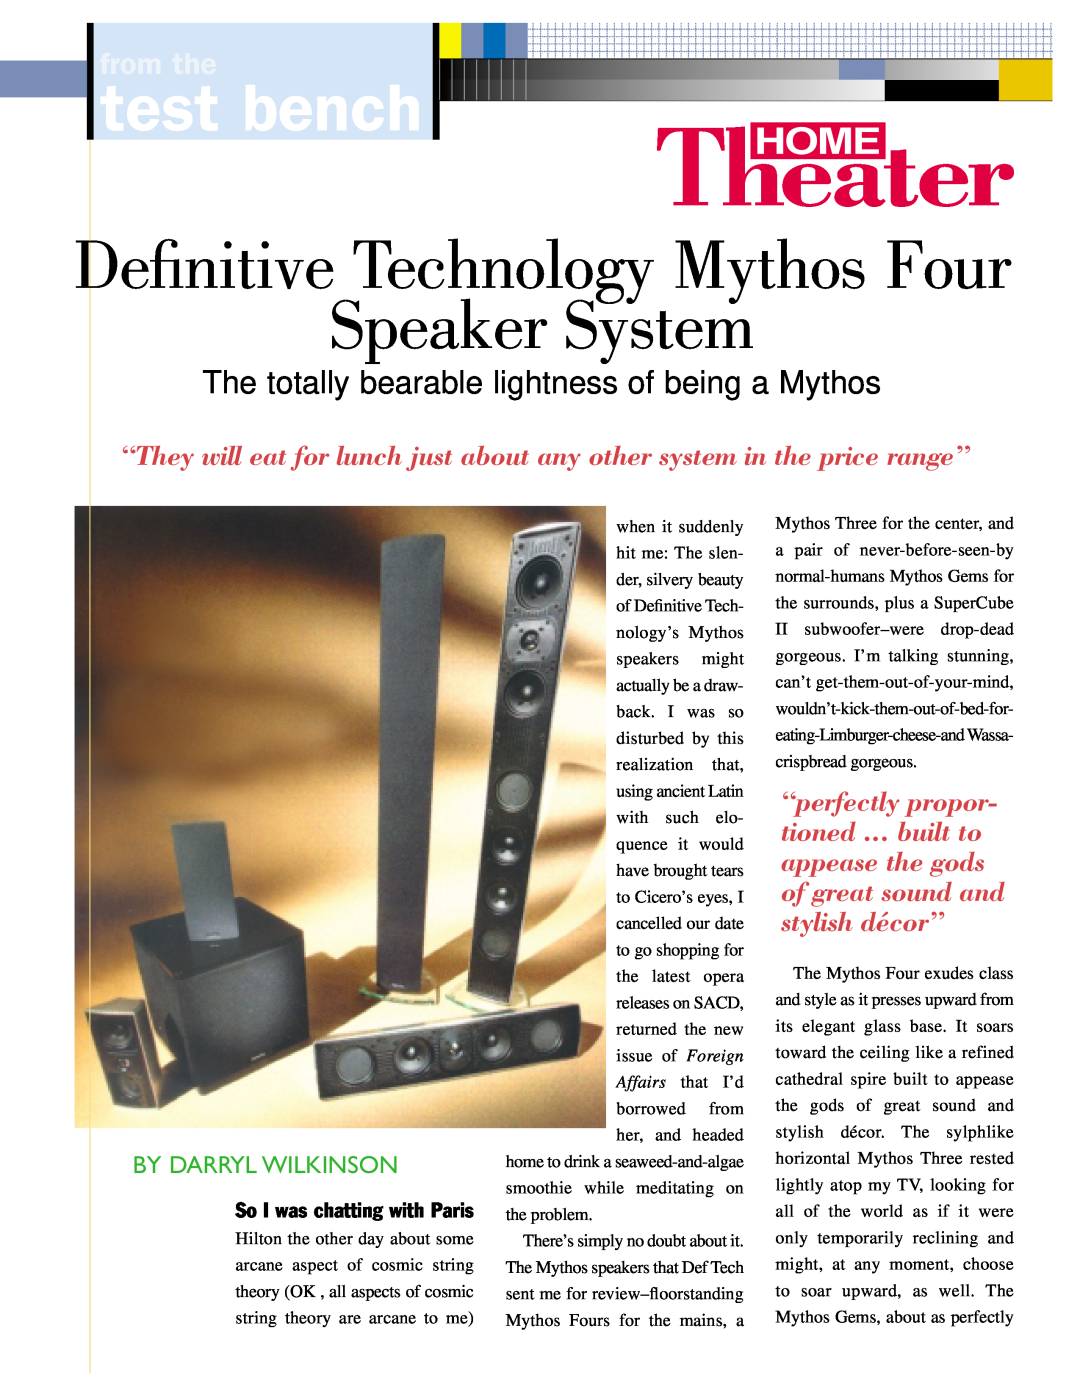 Definitive Technology HT1004 manual Speaker System, Deﬁnitive Technology Mythos Four, test bench, from the 